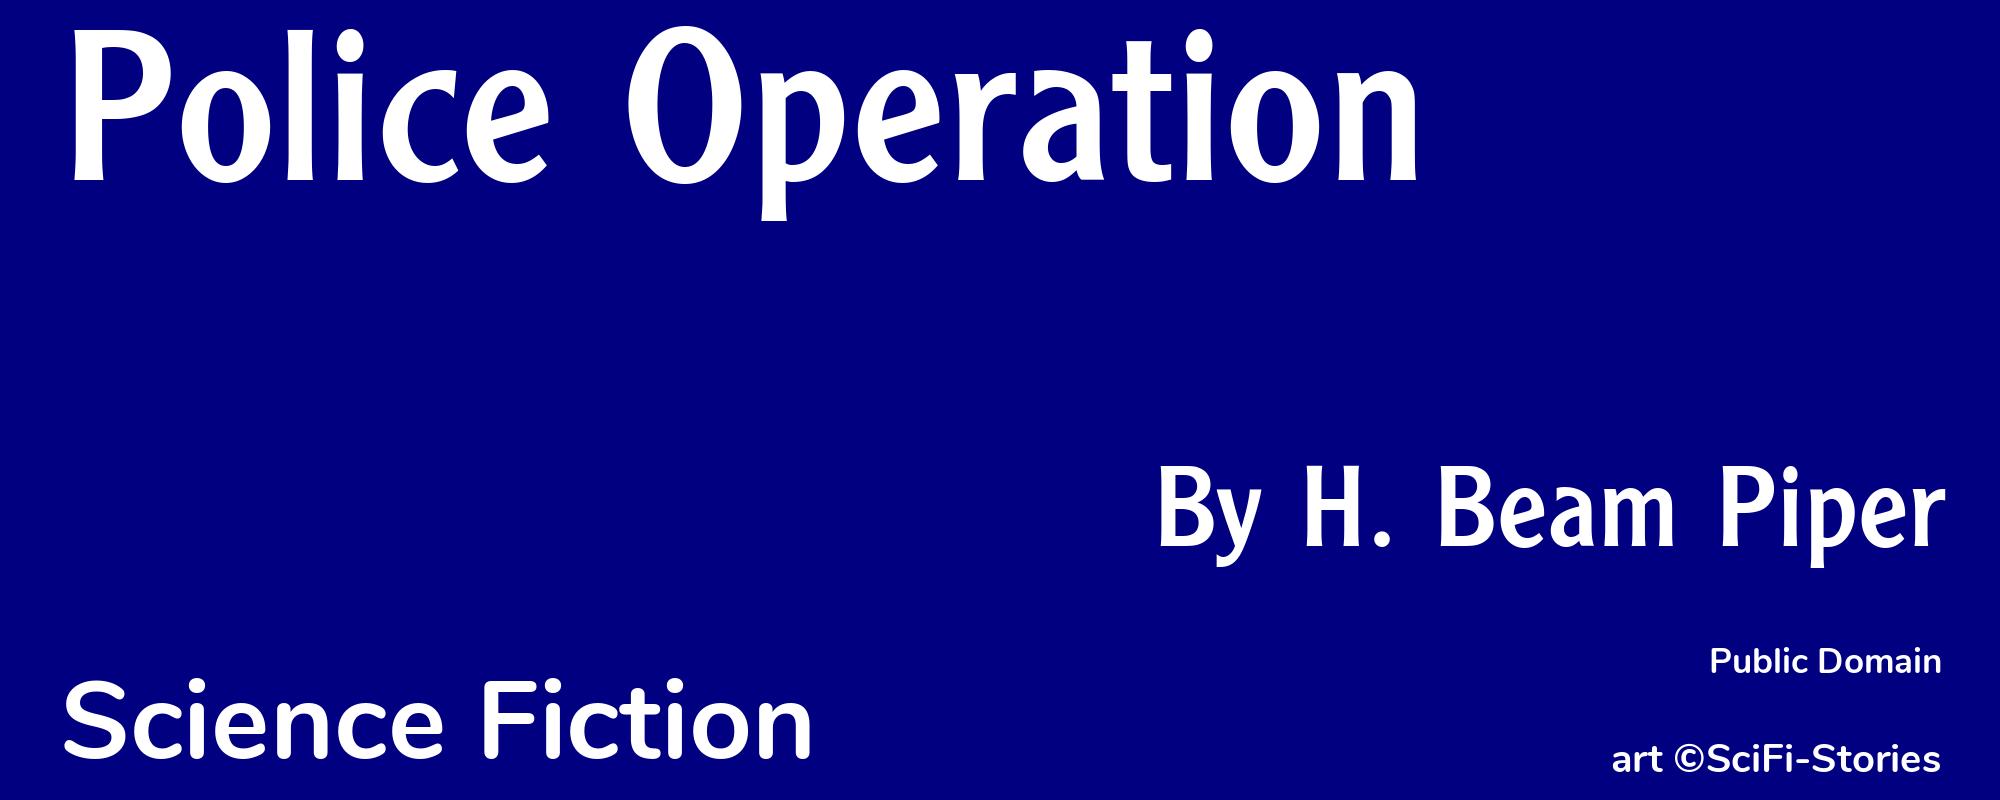 Police Operation - Cover